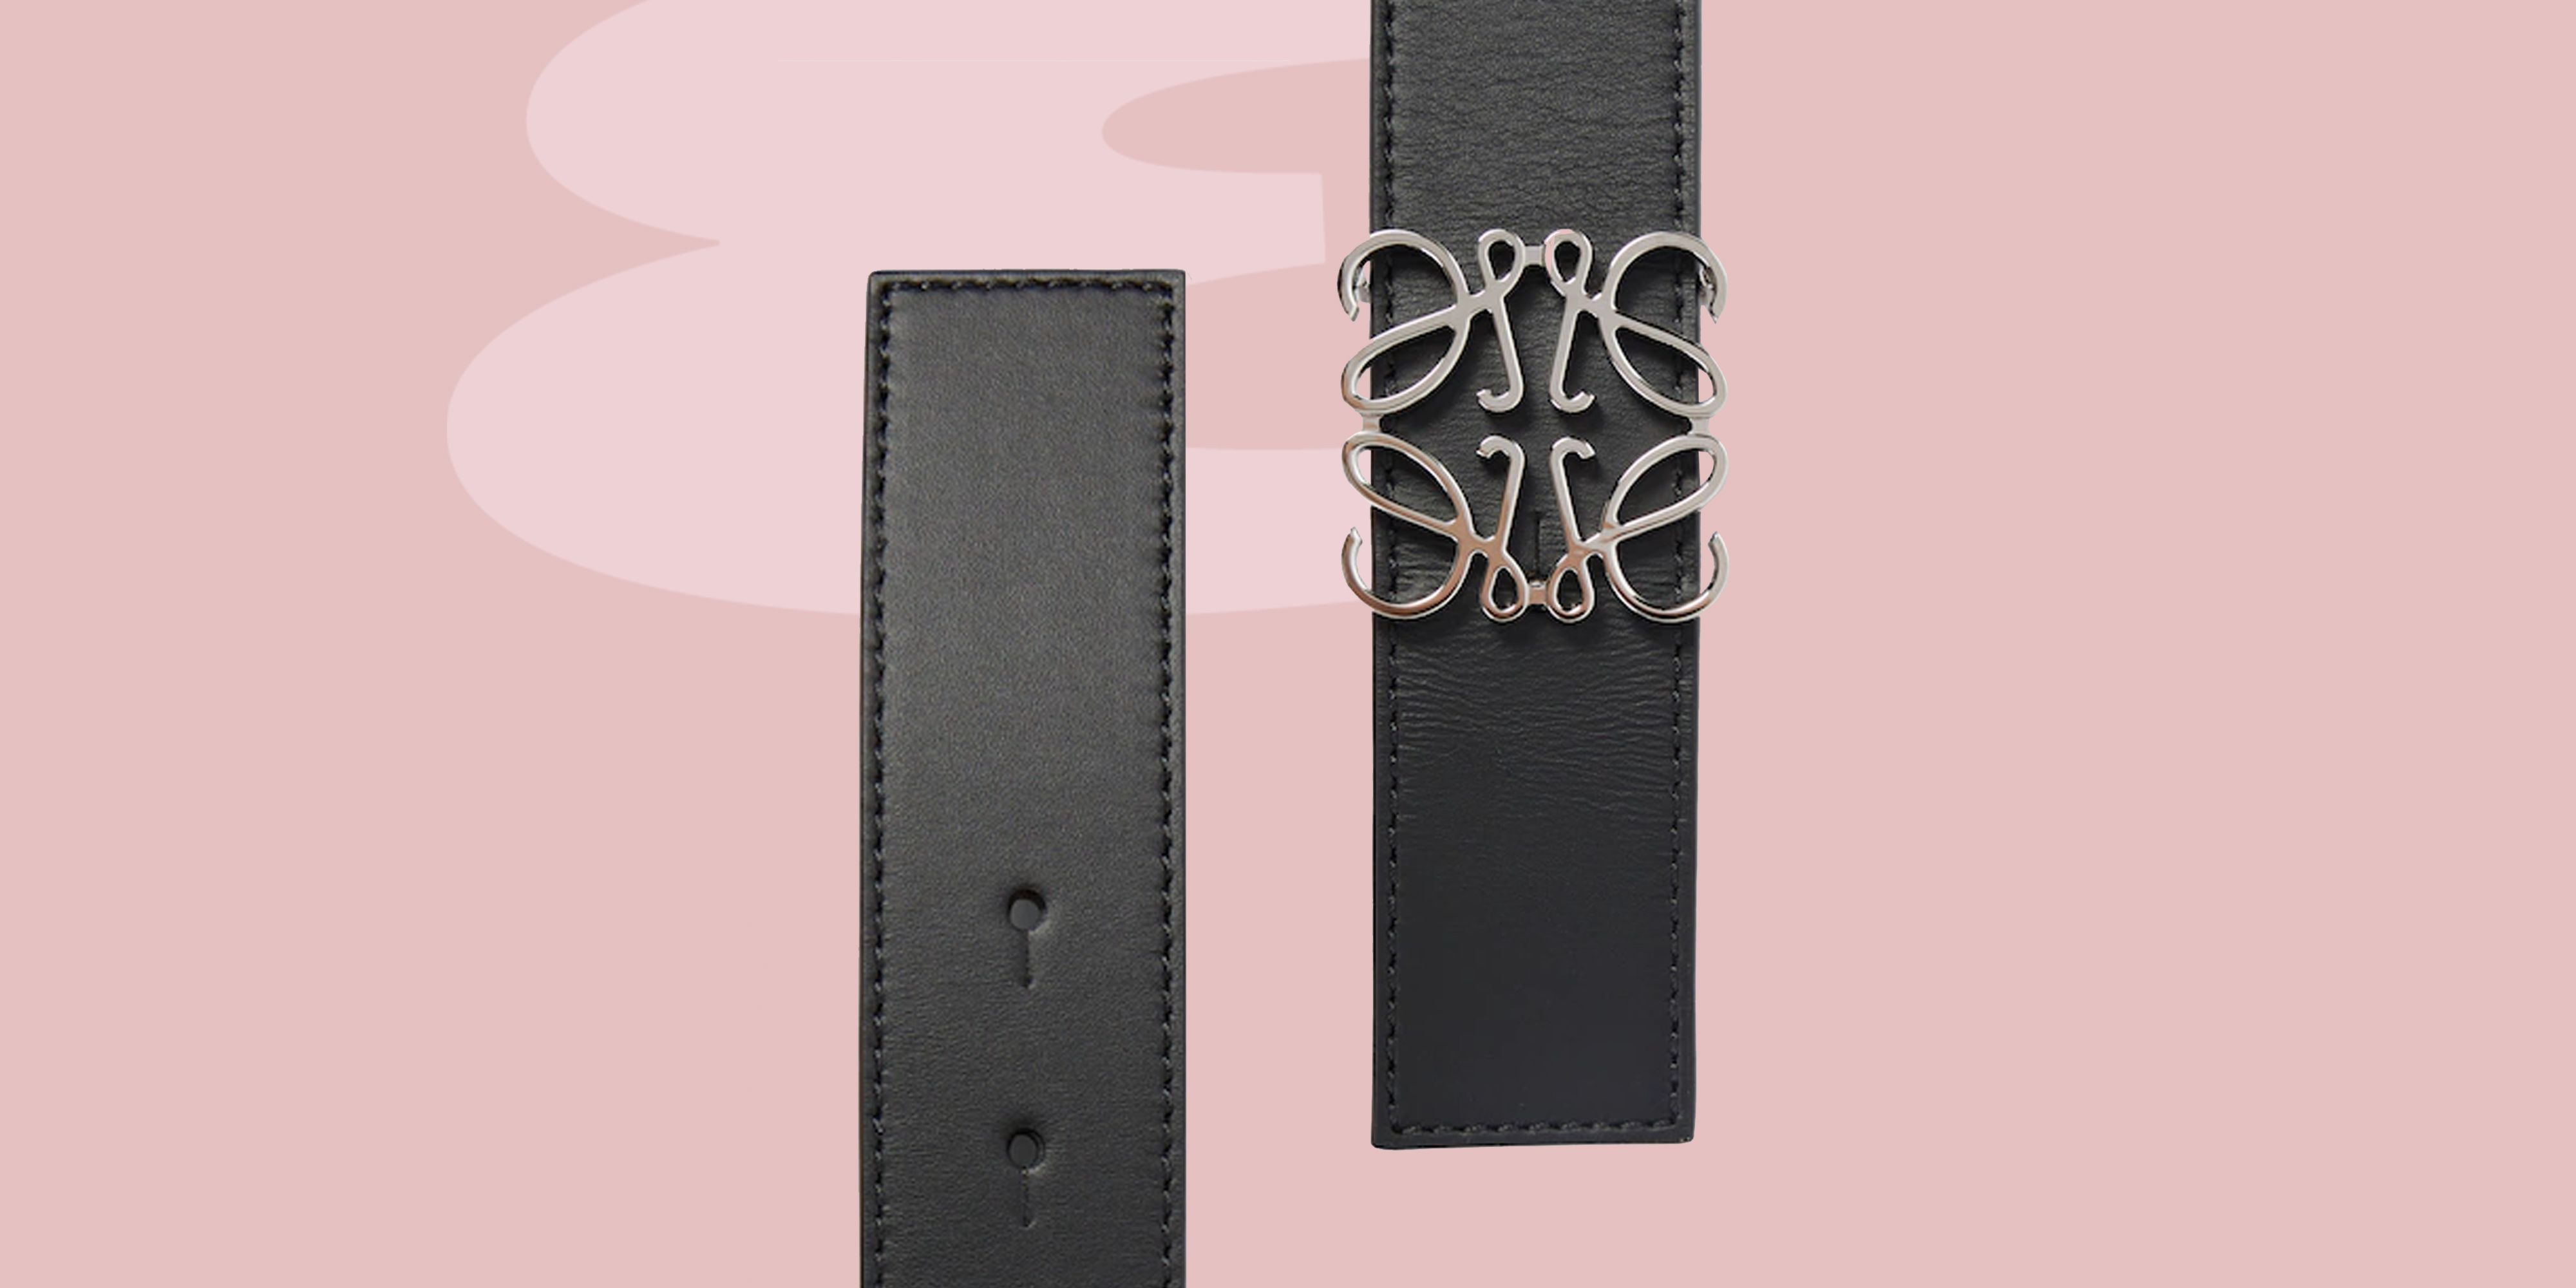 These designer logo belts will instantly elevate any outfit